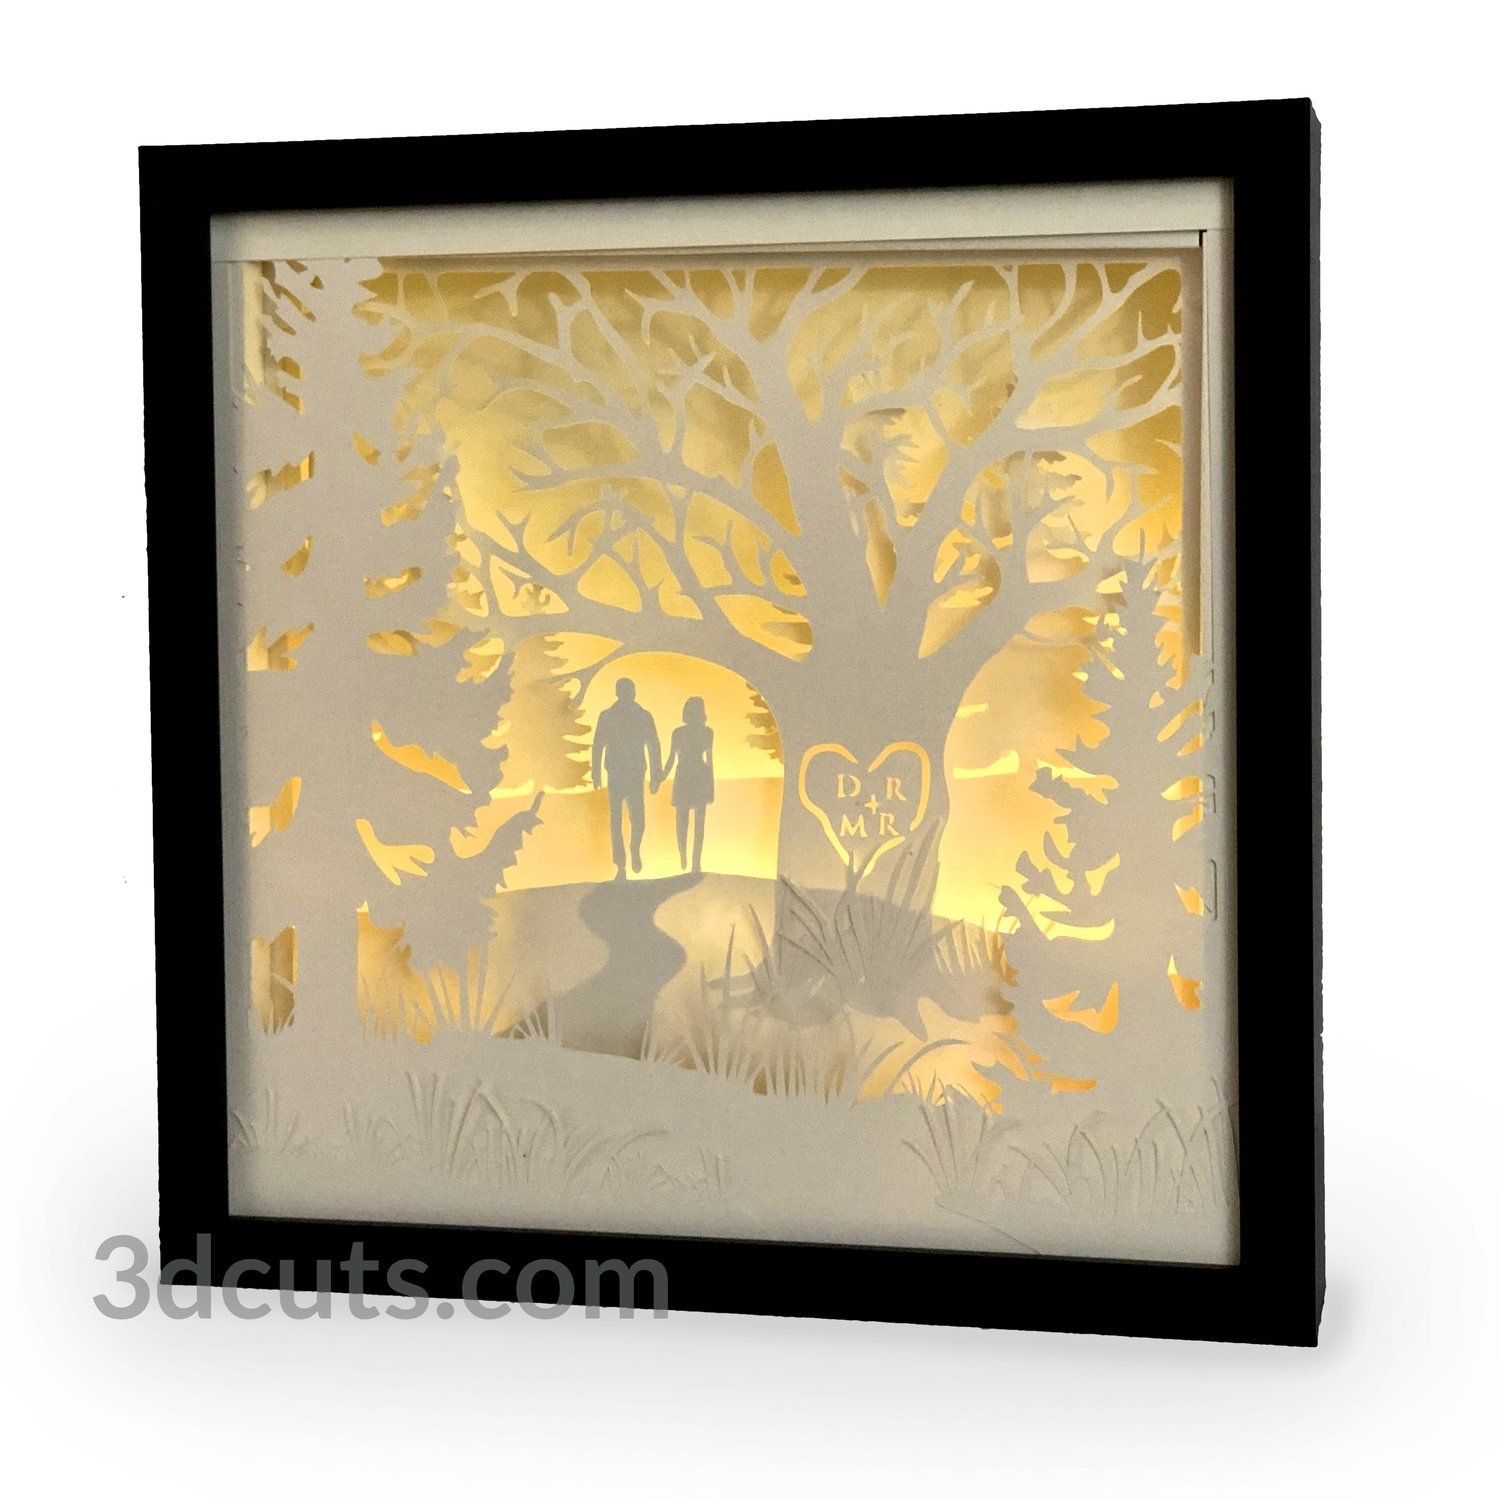 SVG Picture Frame 3D Shadow Box Template Paper Card Light Box Cut File